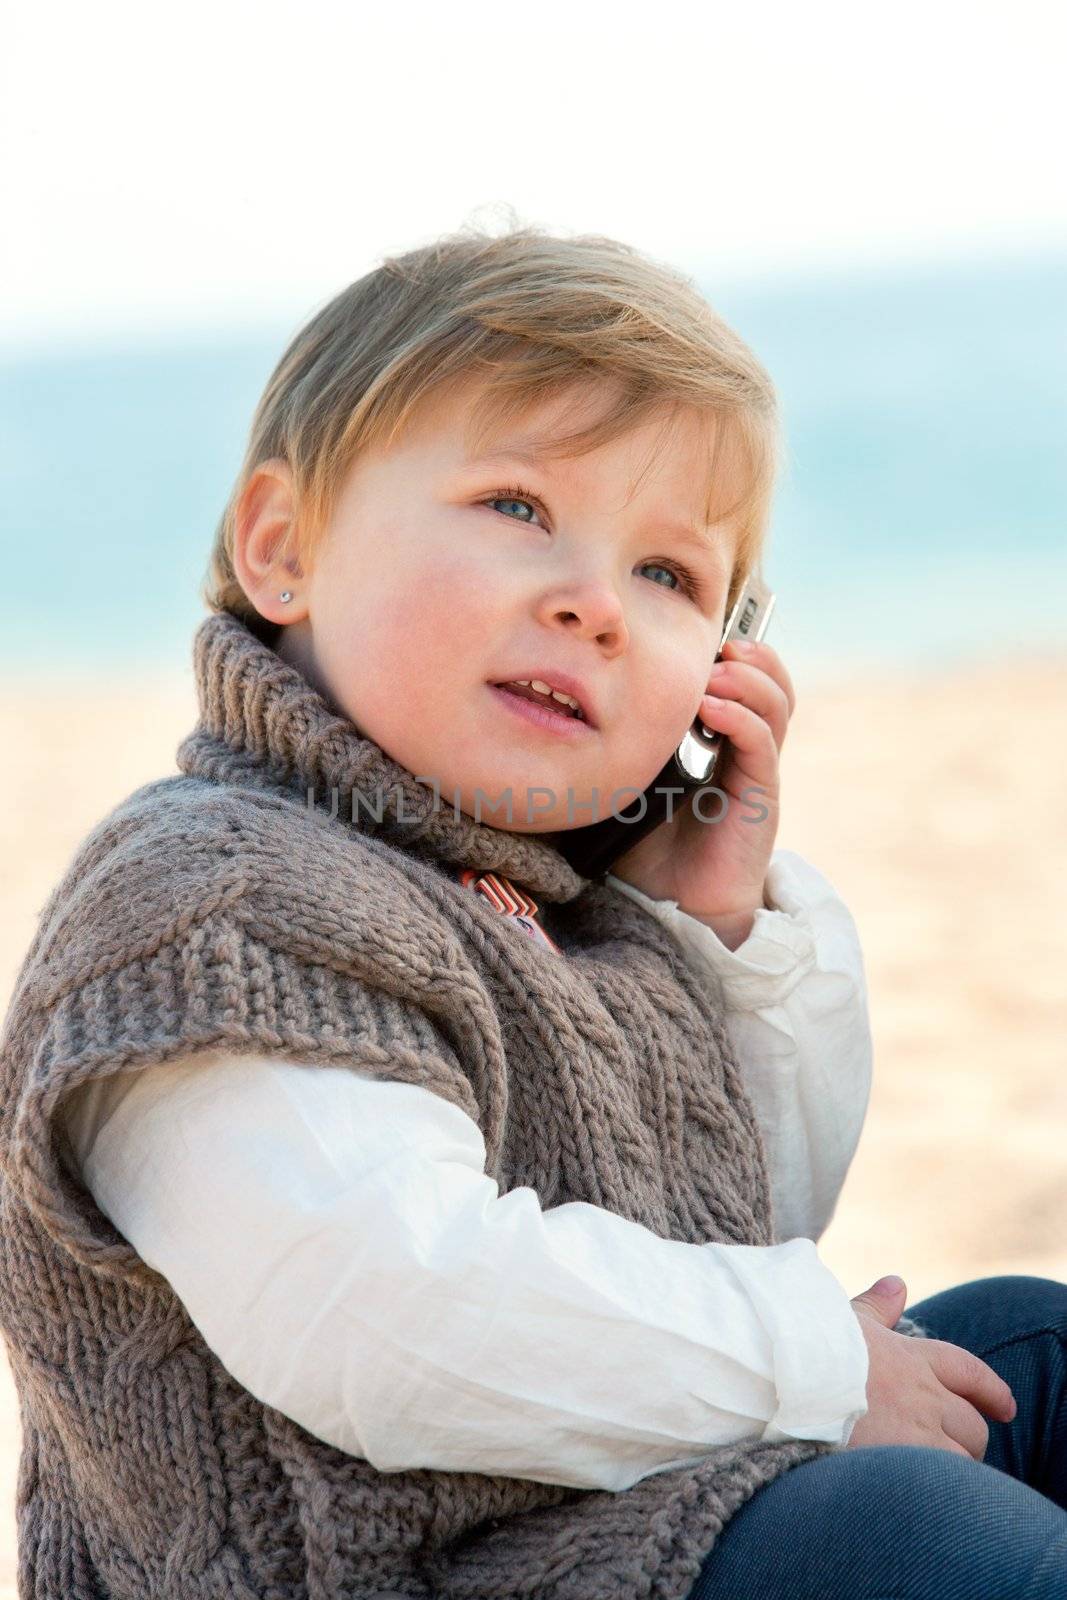 Baby girl talking on mobile phone. by karelnoppe